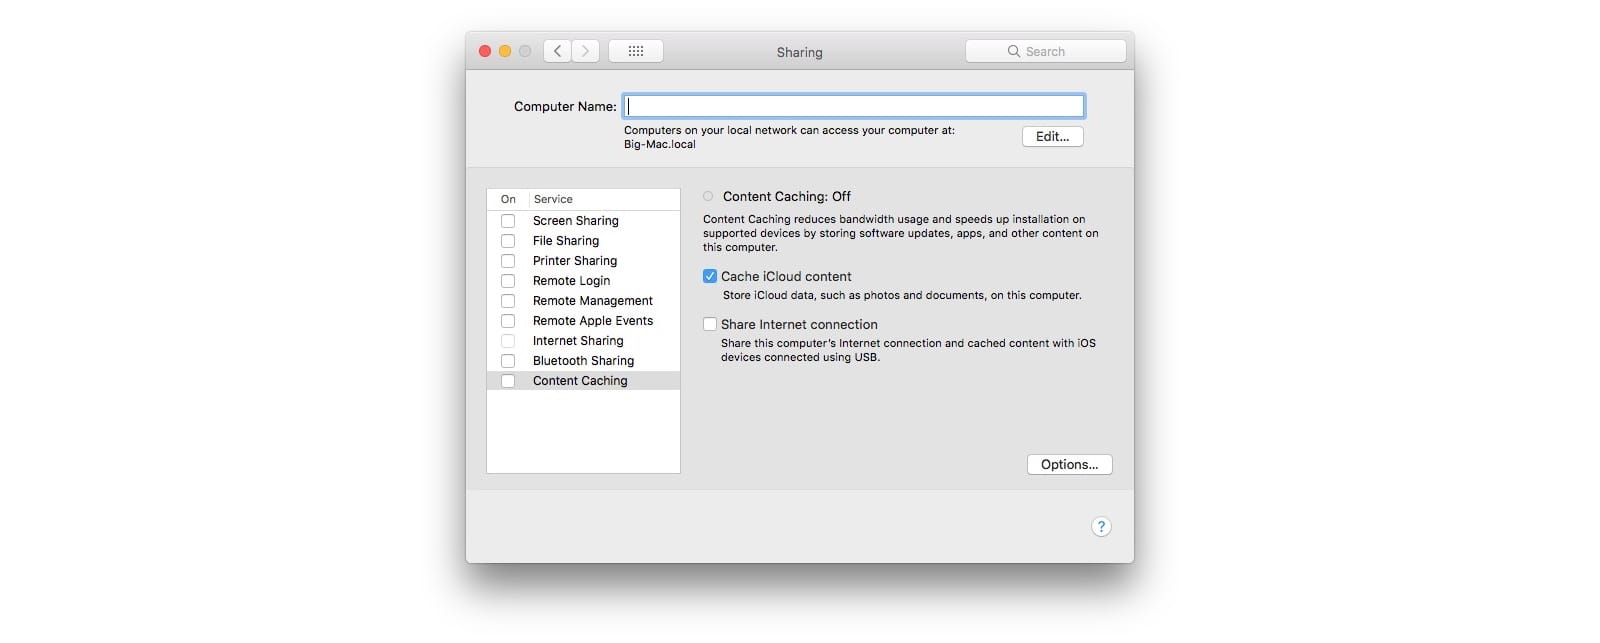 Just head to the Sharnig preferences to switch on content caching.